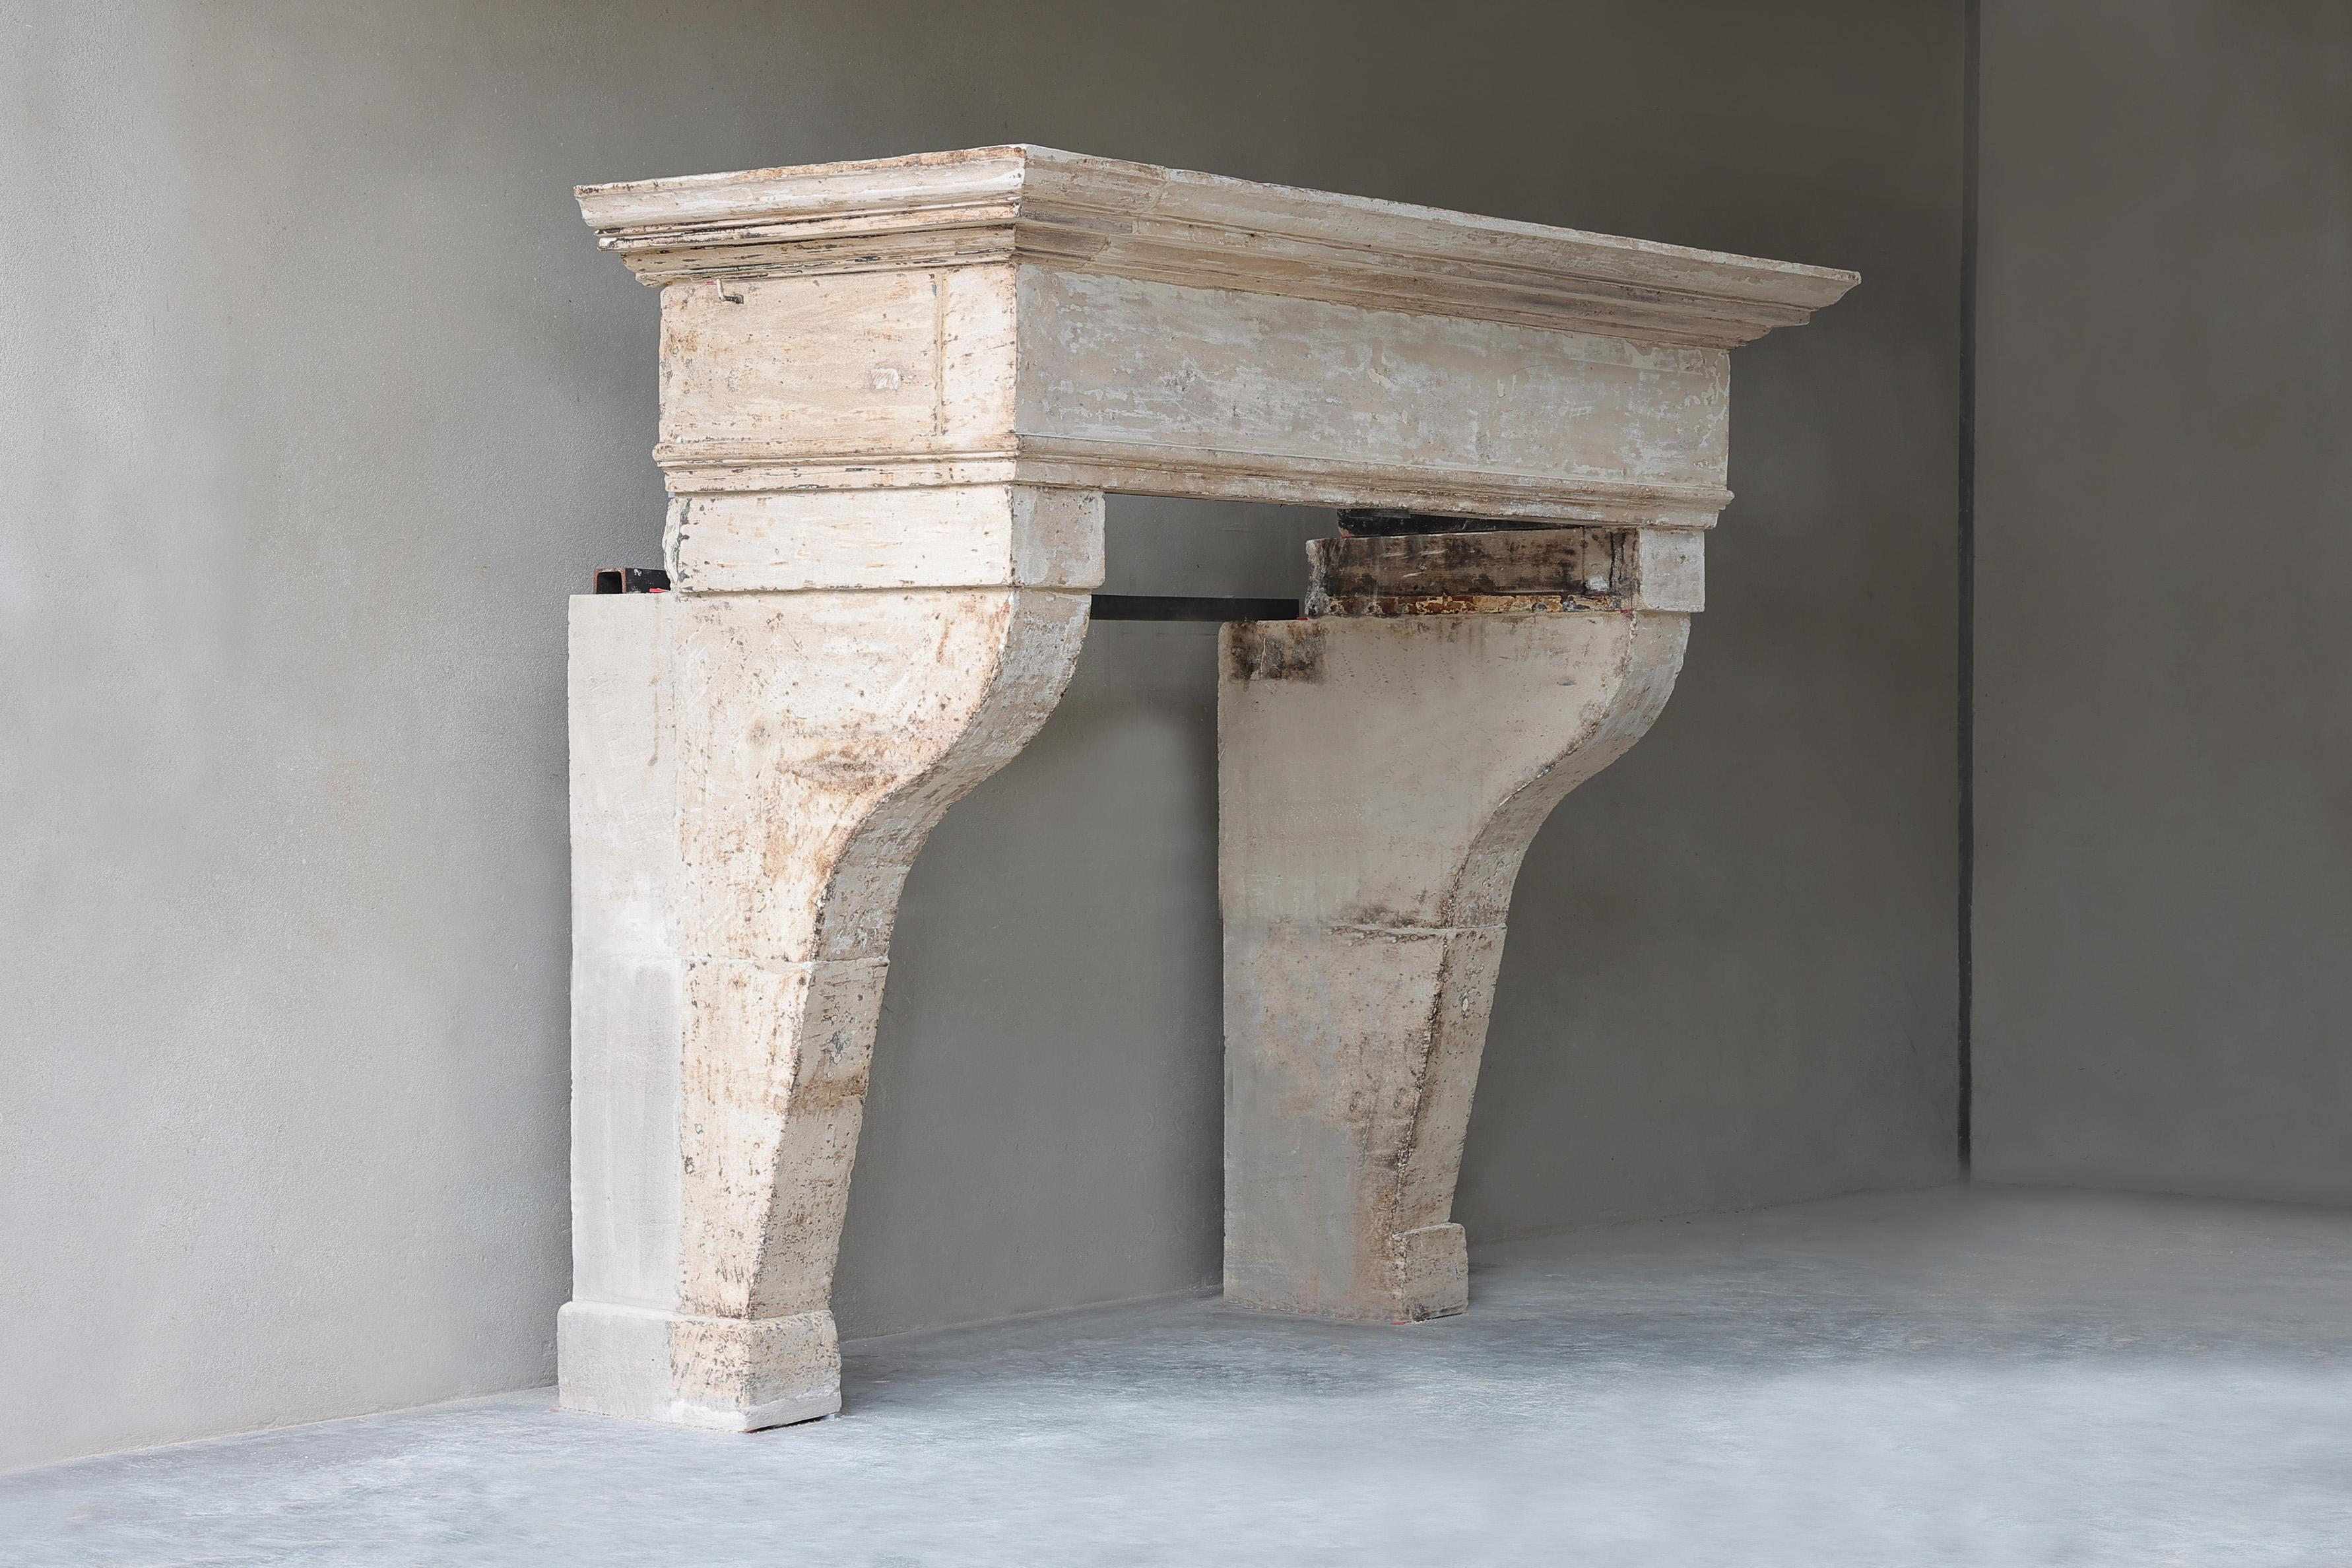 This antique castle mantelpiece made of French limestone dates from the 18th century and is in the style of Louis XIII. An imposing fireplace with a wide front section and slightly curved legs and molding. This fireplace has a very stately and